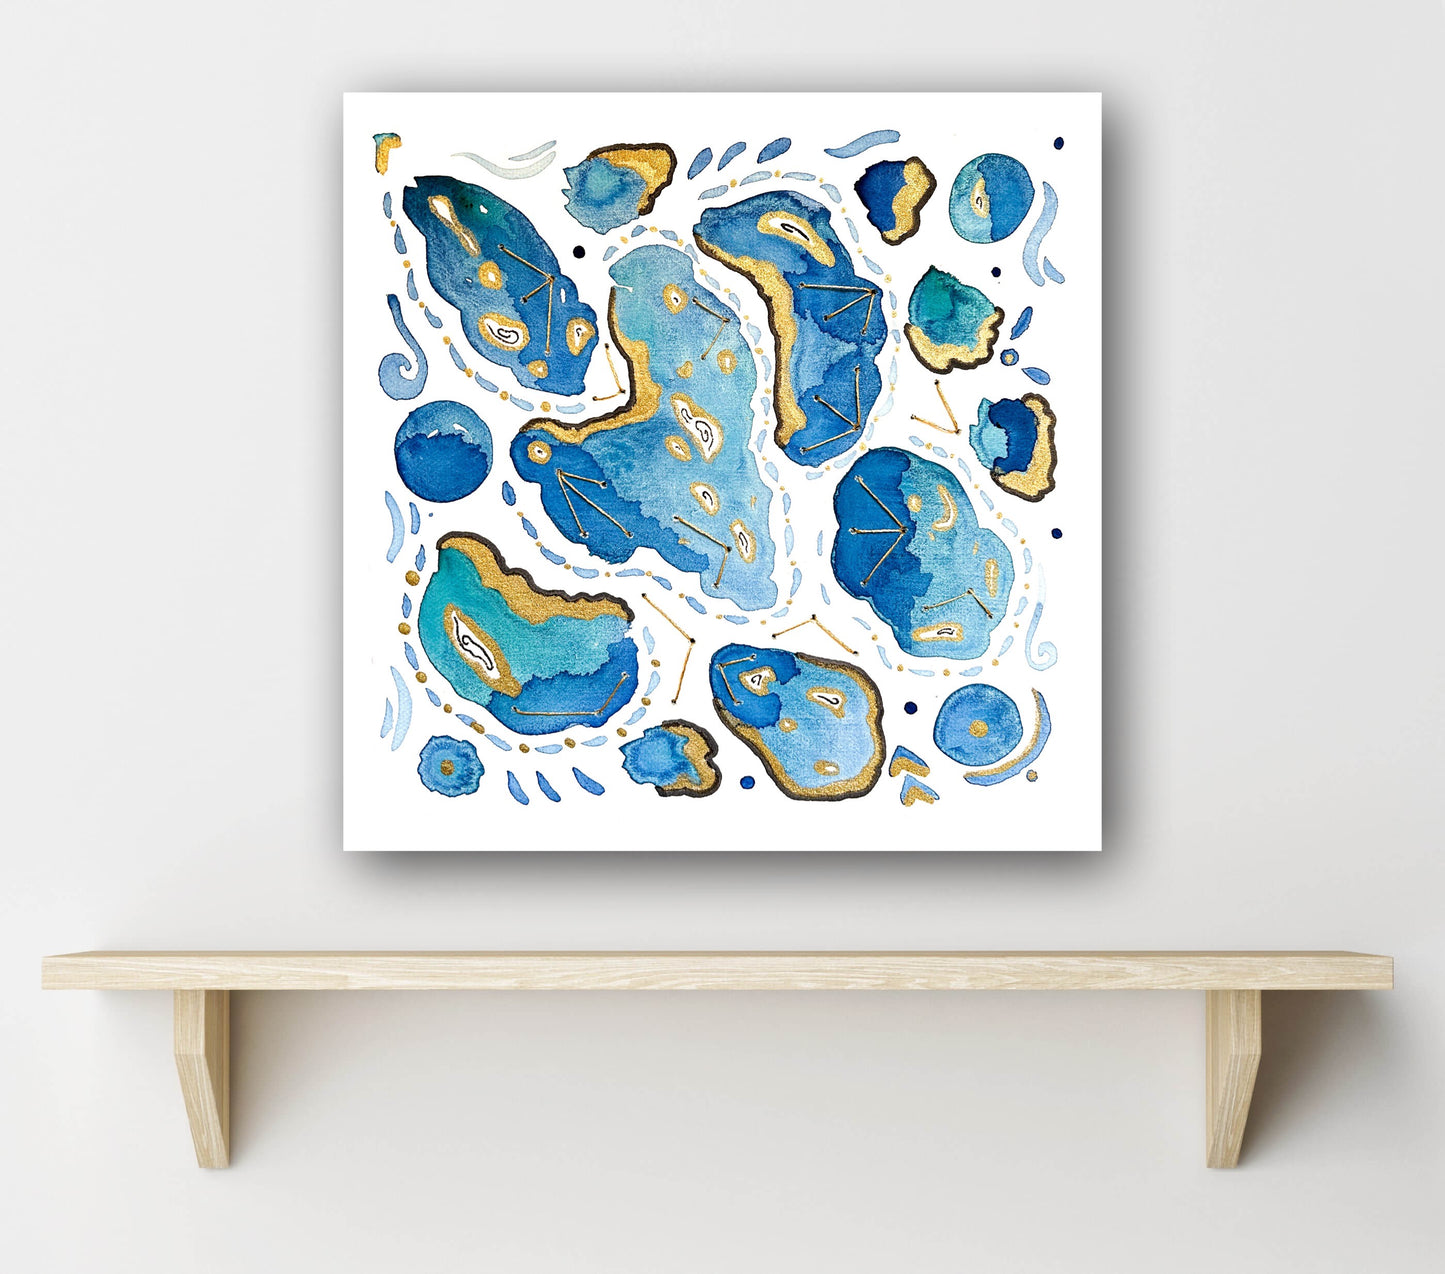 'Blue Shoals' Embellished Art Print - Signed By the Artist - Limited Edition